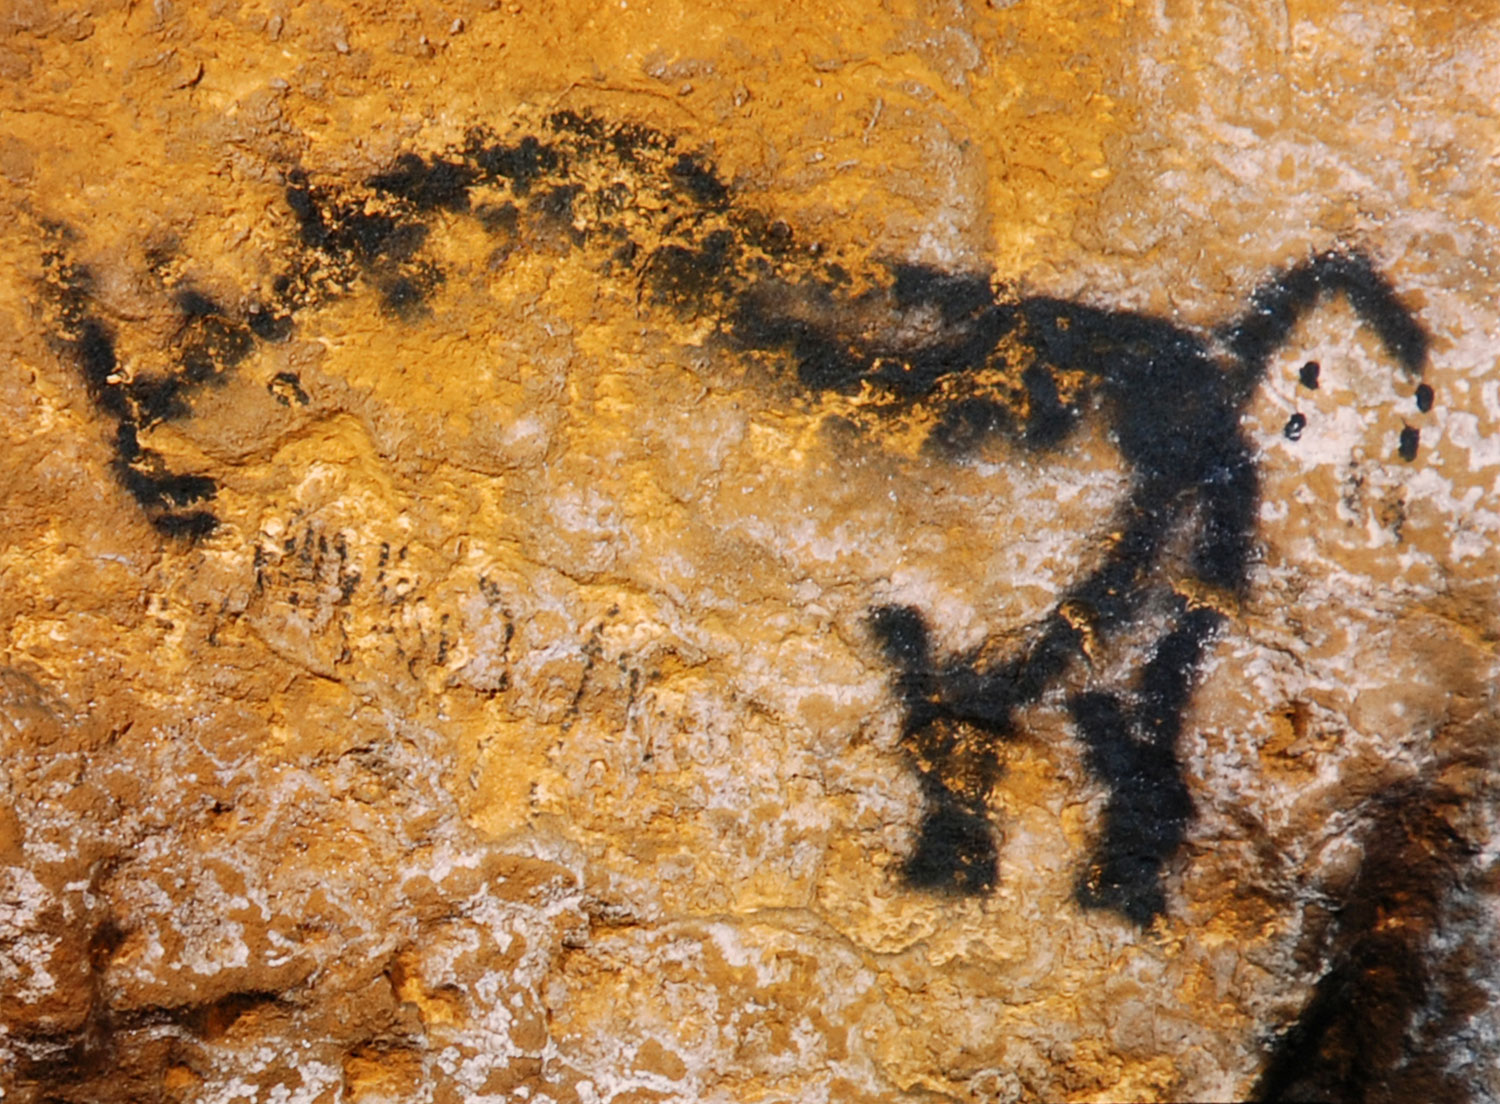 The idea of an enormous (over six feet tall and weighing roughly three tons) woolly rhino roaming what is now France might sound like the stuff of science fiction. But roughly 17,000 years ago, on the limestone walls of Lascaux, an artful, Ice Age hand recorded the existence of just such a creature. Fossils indicate that the front horn of the animal could reach three feet in length.